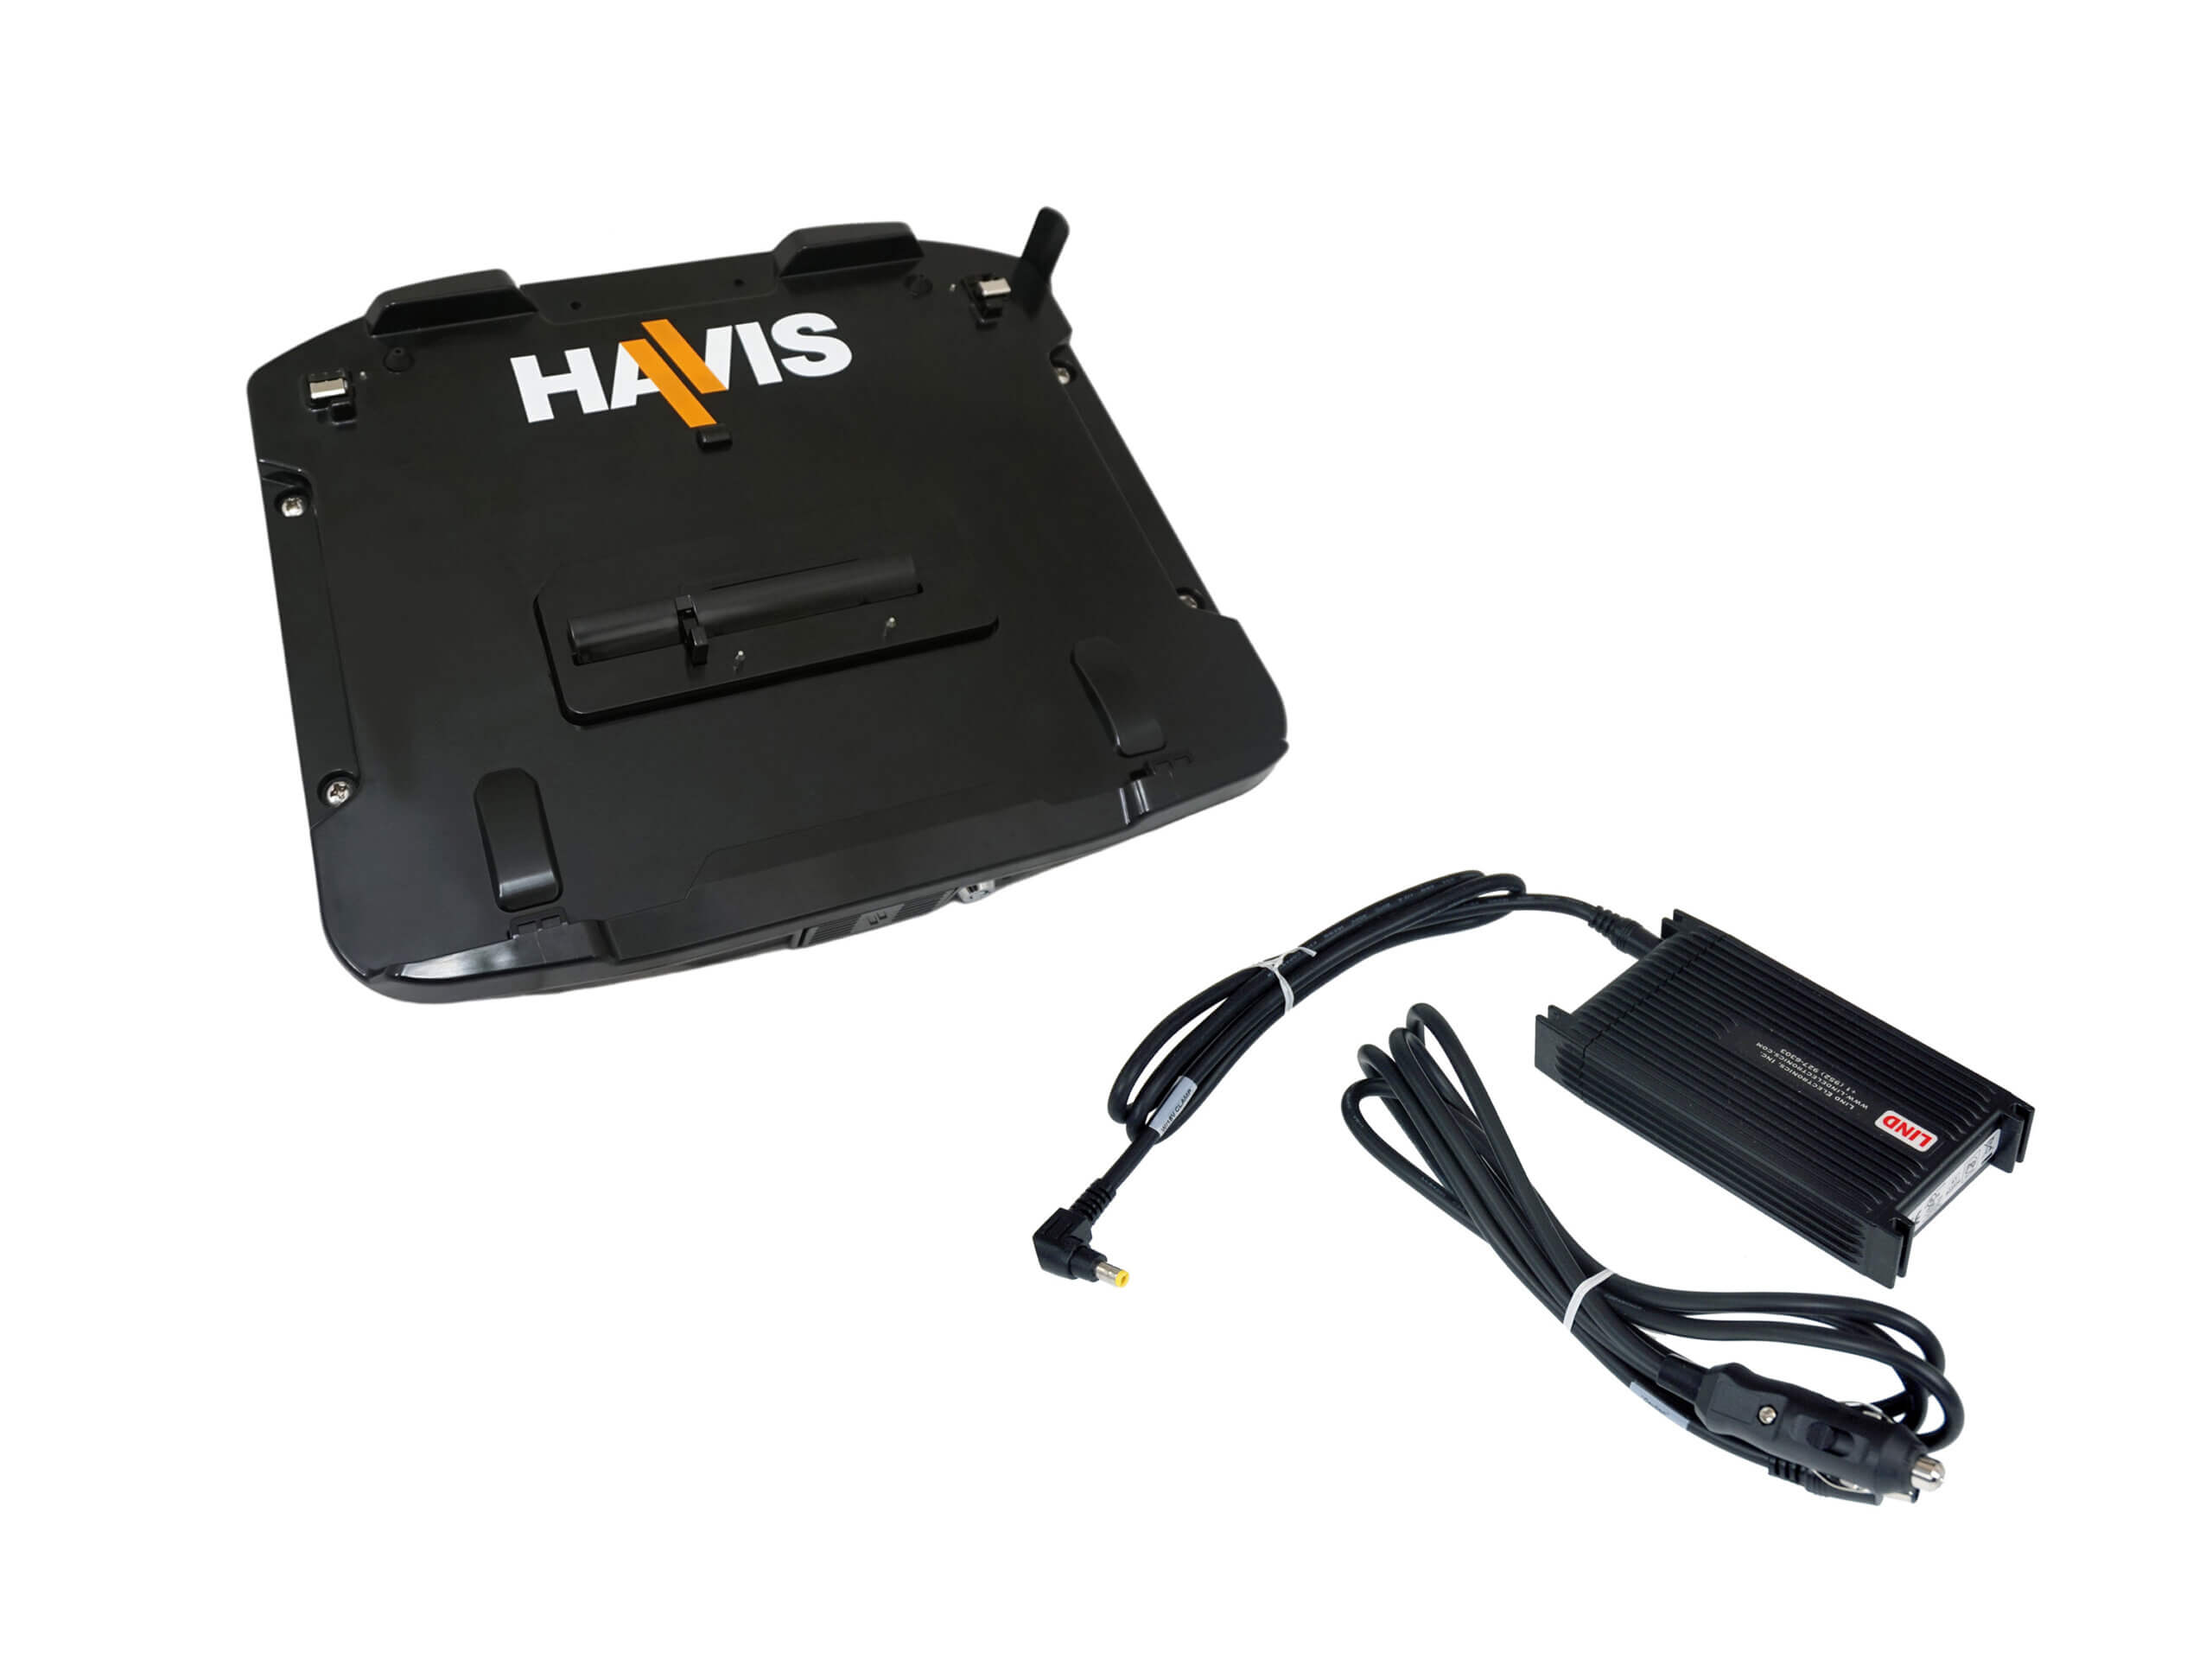 Docking Station For Panasonic TOUGHBOOK 40 Laptop with Standard Port Replication & LIND Power Supply